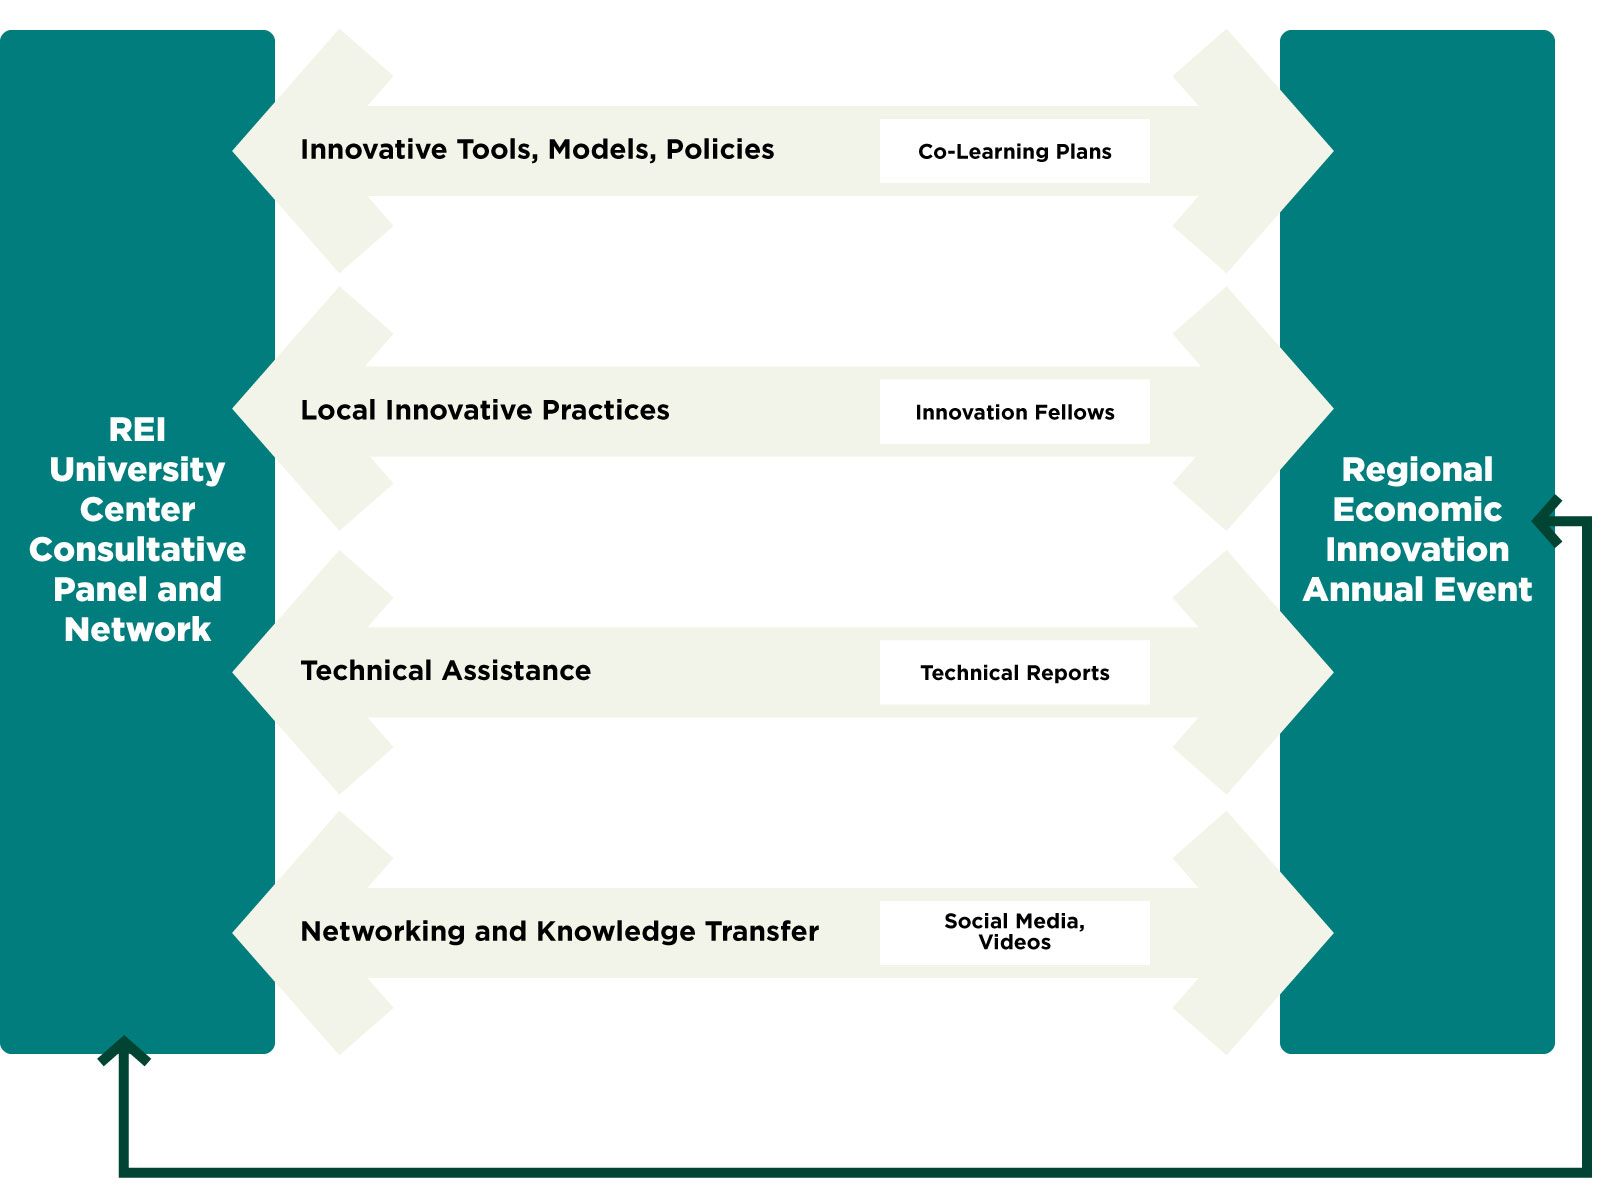 REI model diagram. On the left side is a box labeled 'REI University Center Consultative Panel and Network' and on the right a box labeled 'Regional Economic Innovation Annual Event.' Four large bidirectional arrows connect them, as well as a small one on the outside. The arrows are 'Innovative Tools, Models, Policies/Co-Learning Plans,' 'Local Innovative Practices/Innovation Fellows,' 'Technical Assistance/Technical Reports,' and 'Networking and Knowledge Transfer/Social Media, Videos.' The small line is unlabeled.